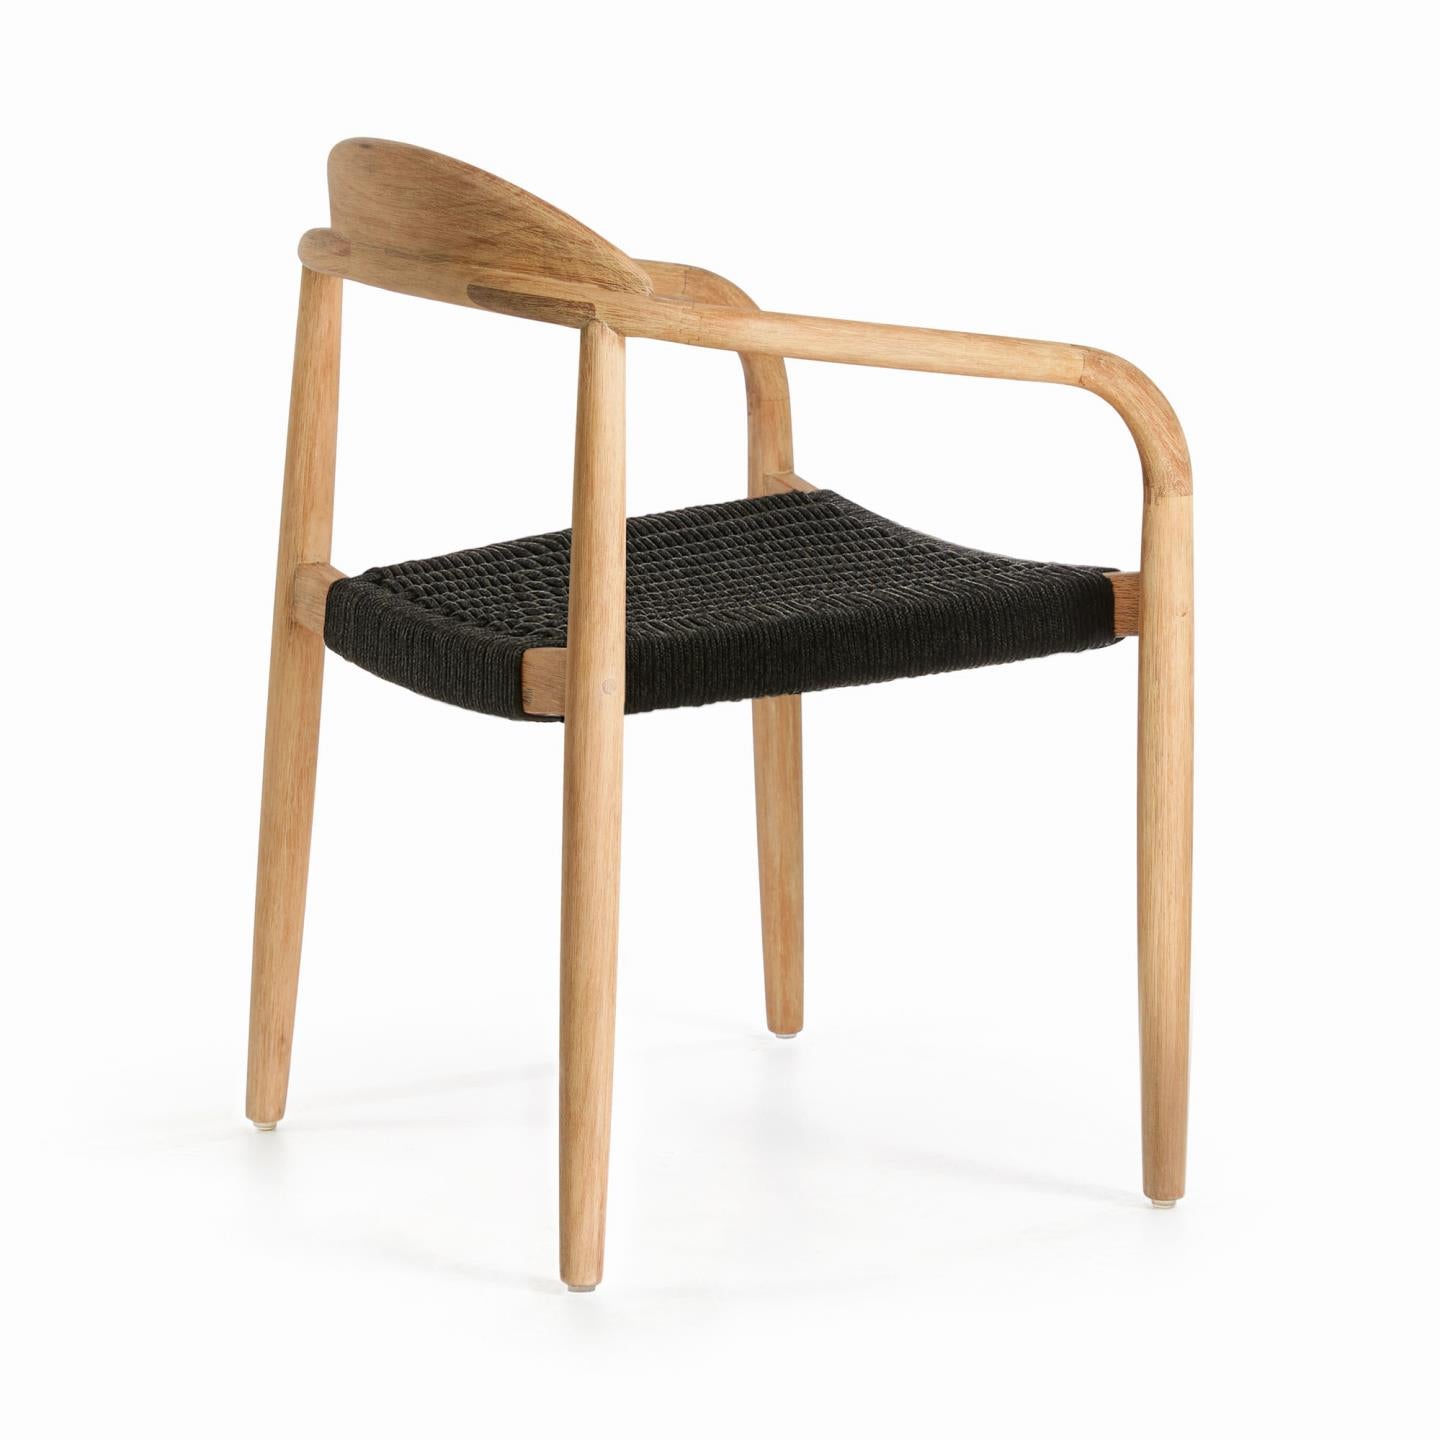 Nina stackable chair in solid acacia wood and black rope seat